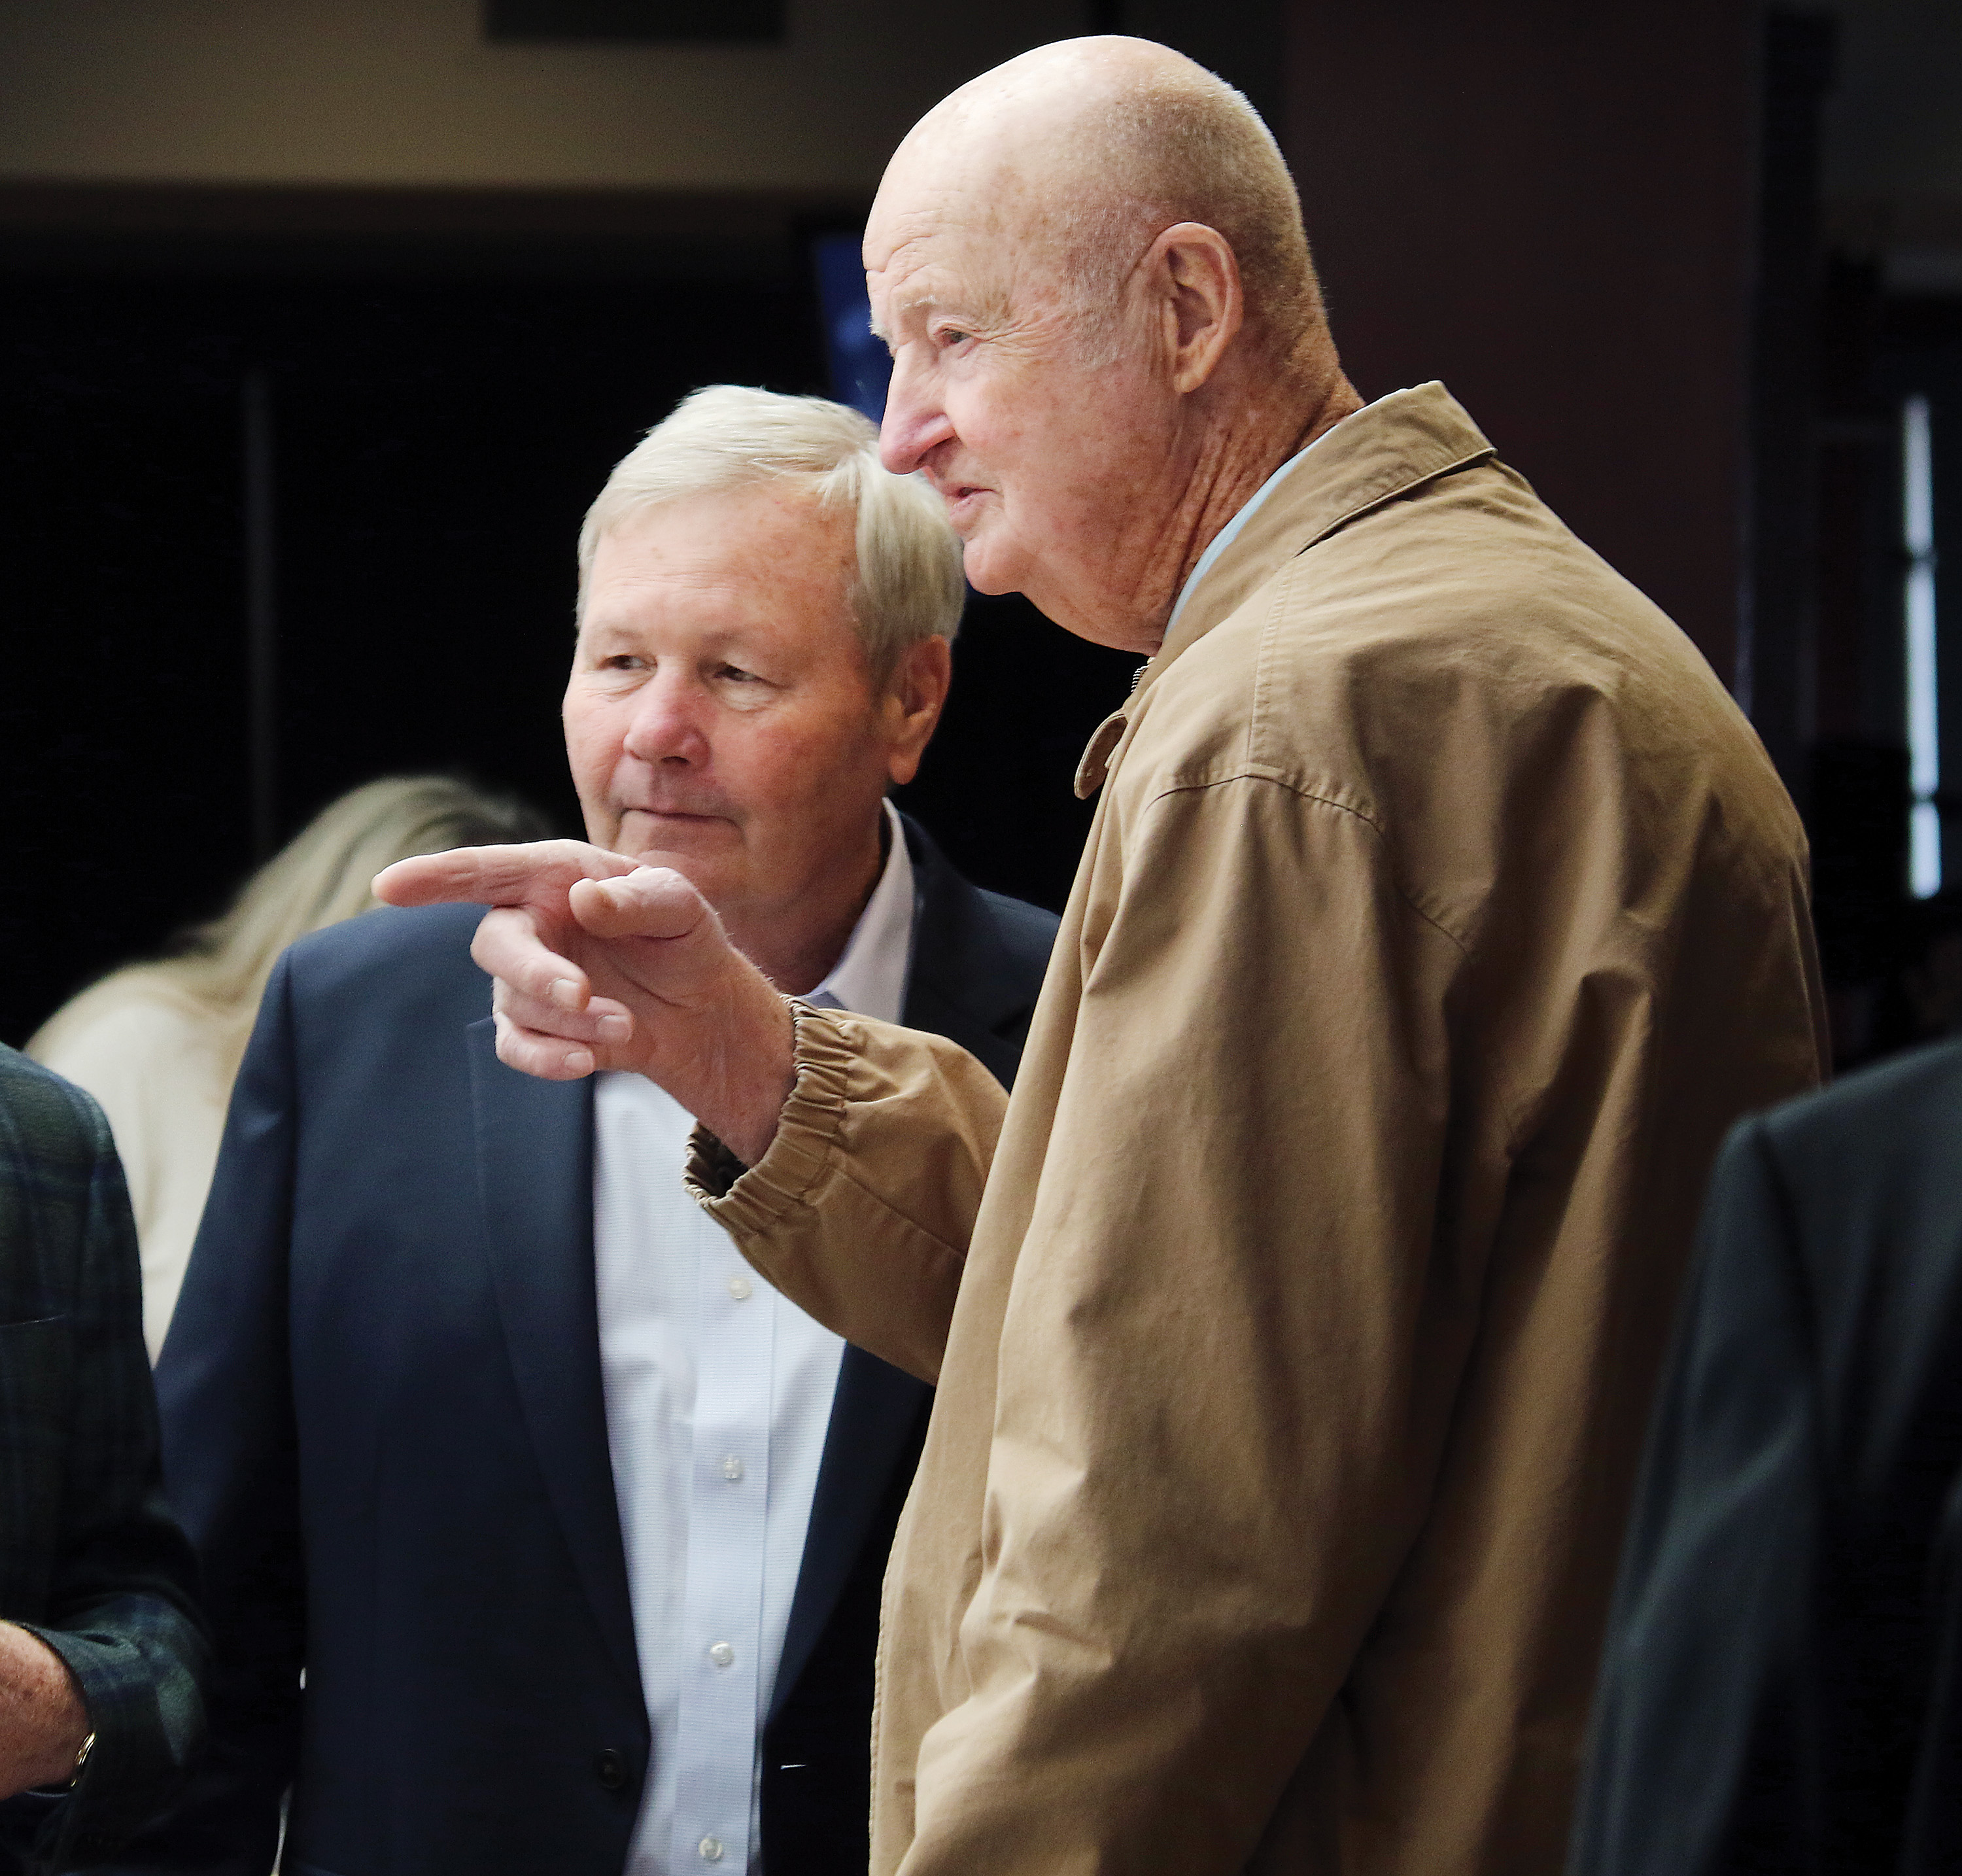 Hub Reed, right, points someone out in the crowd to El Reno's Bill Reeves during the announcement ceremony for the Class of 2020 to be inducted into the Oklahoma Sports Hall of Fame. (Tribune photographer/Glen Miller)